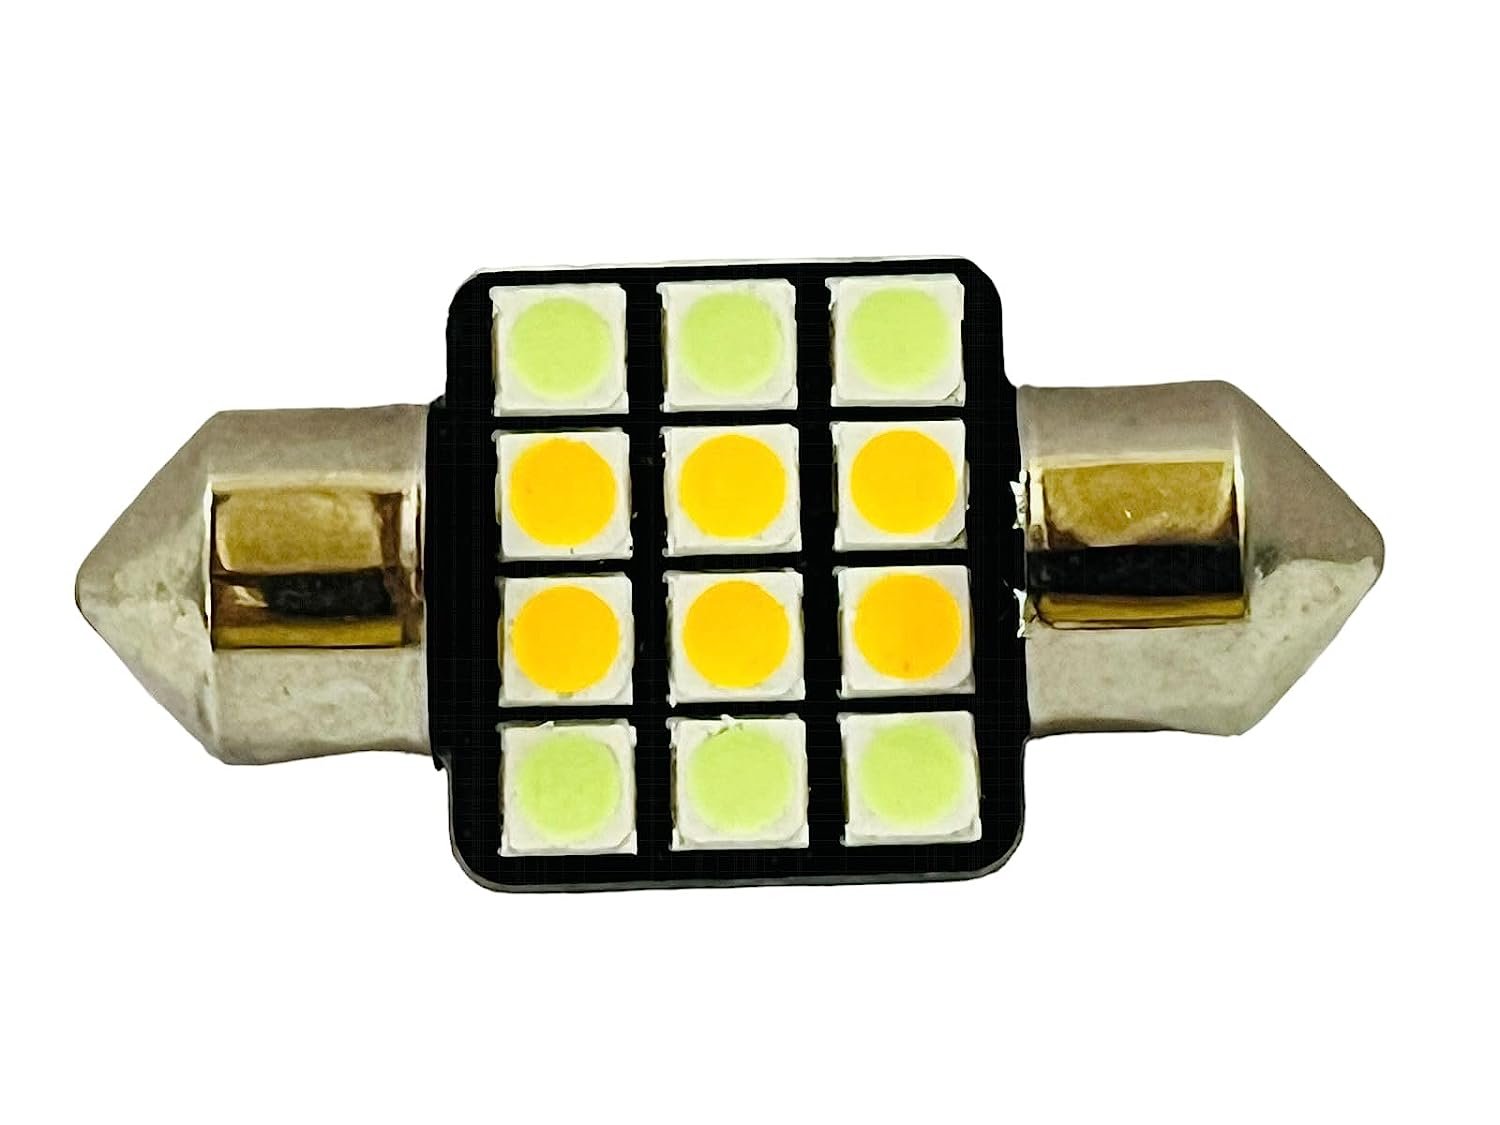 12 SMD LED Interior Car Roof Light Universal For Car (Tri Colour, Size 31MM) (5W) Image 